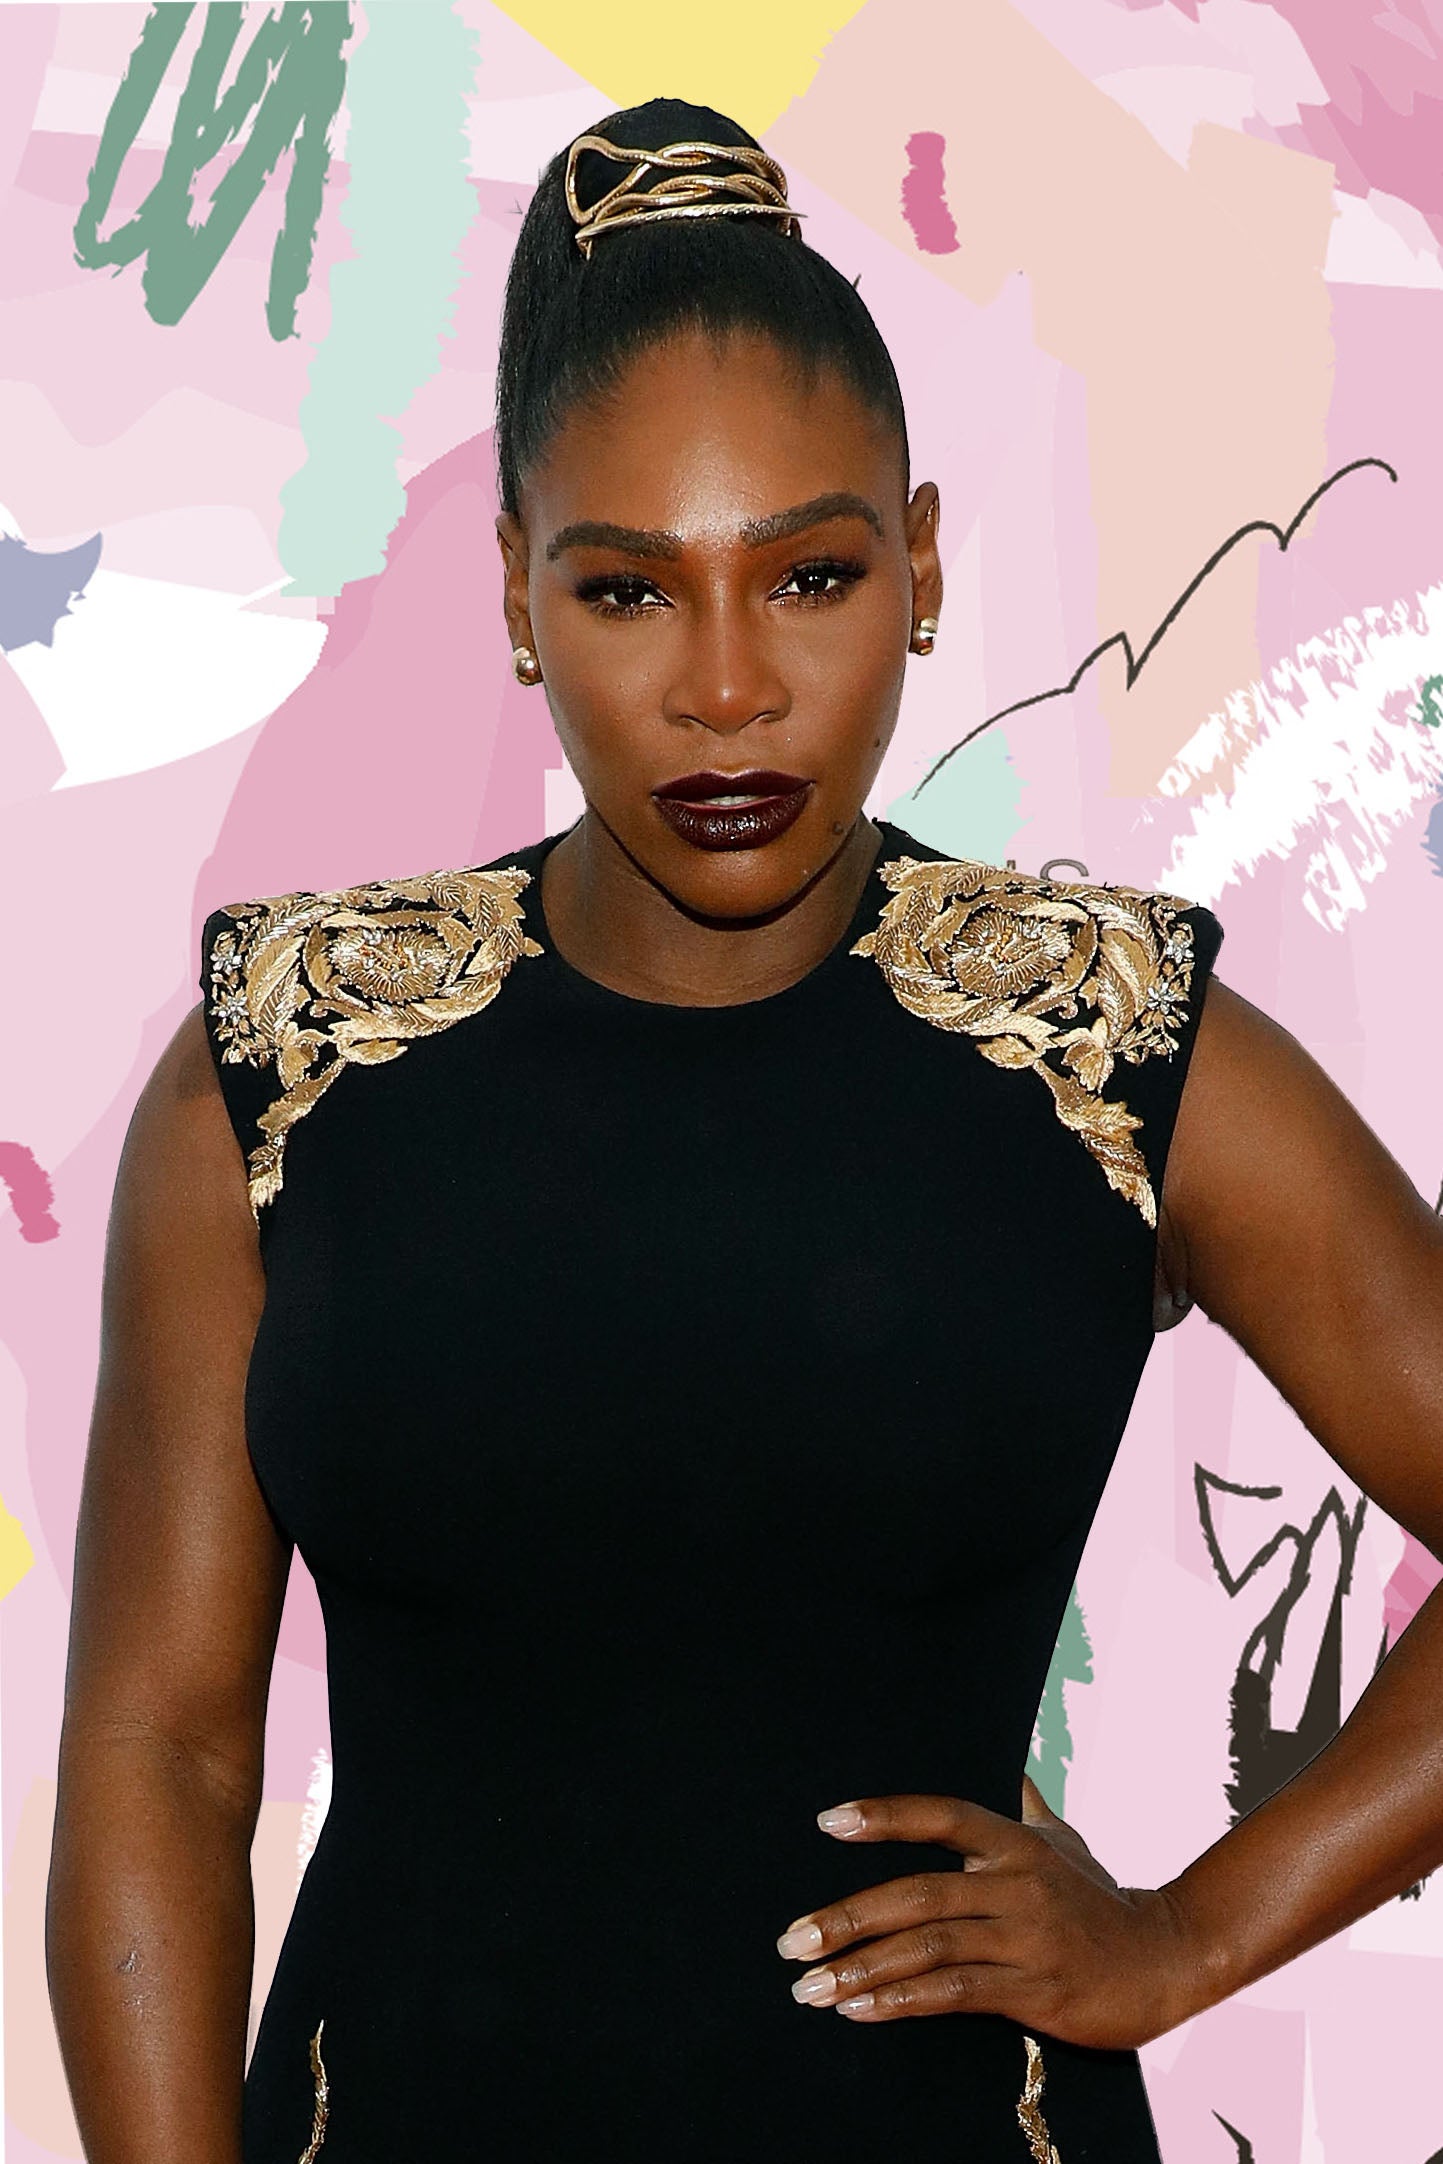 Serena Williams Just Debuted A New Hairstyle On Instagram And She Absolutely Slays